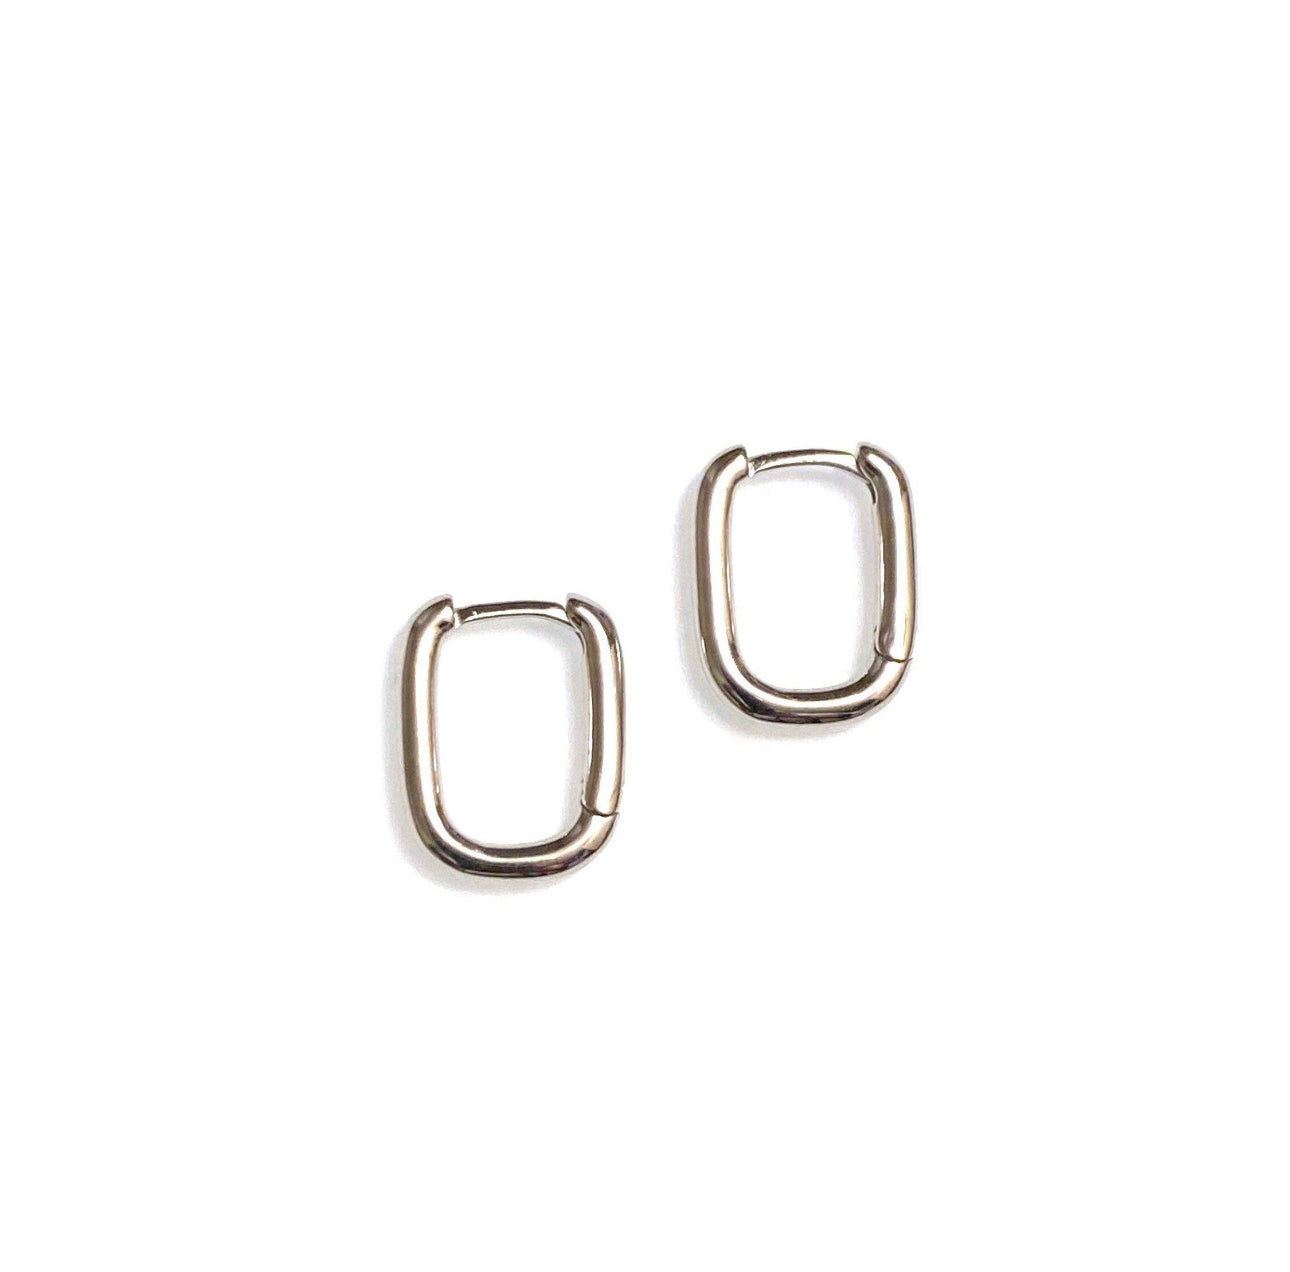 Petite rectangular hoops (sterling silver or gold plated sterling silver)